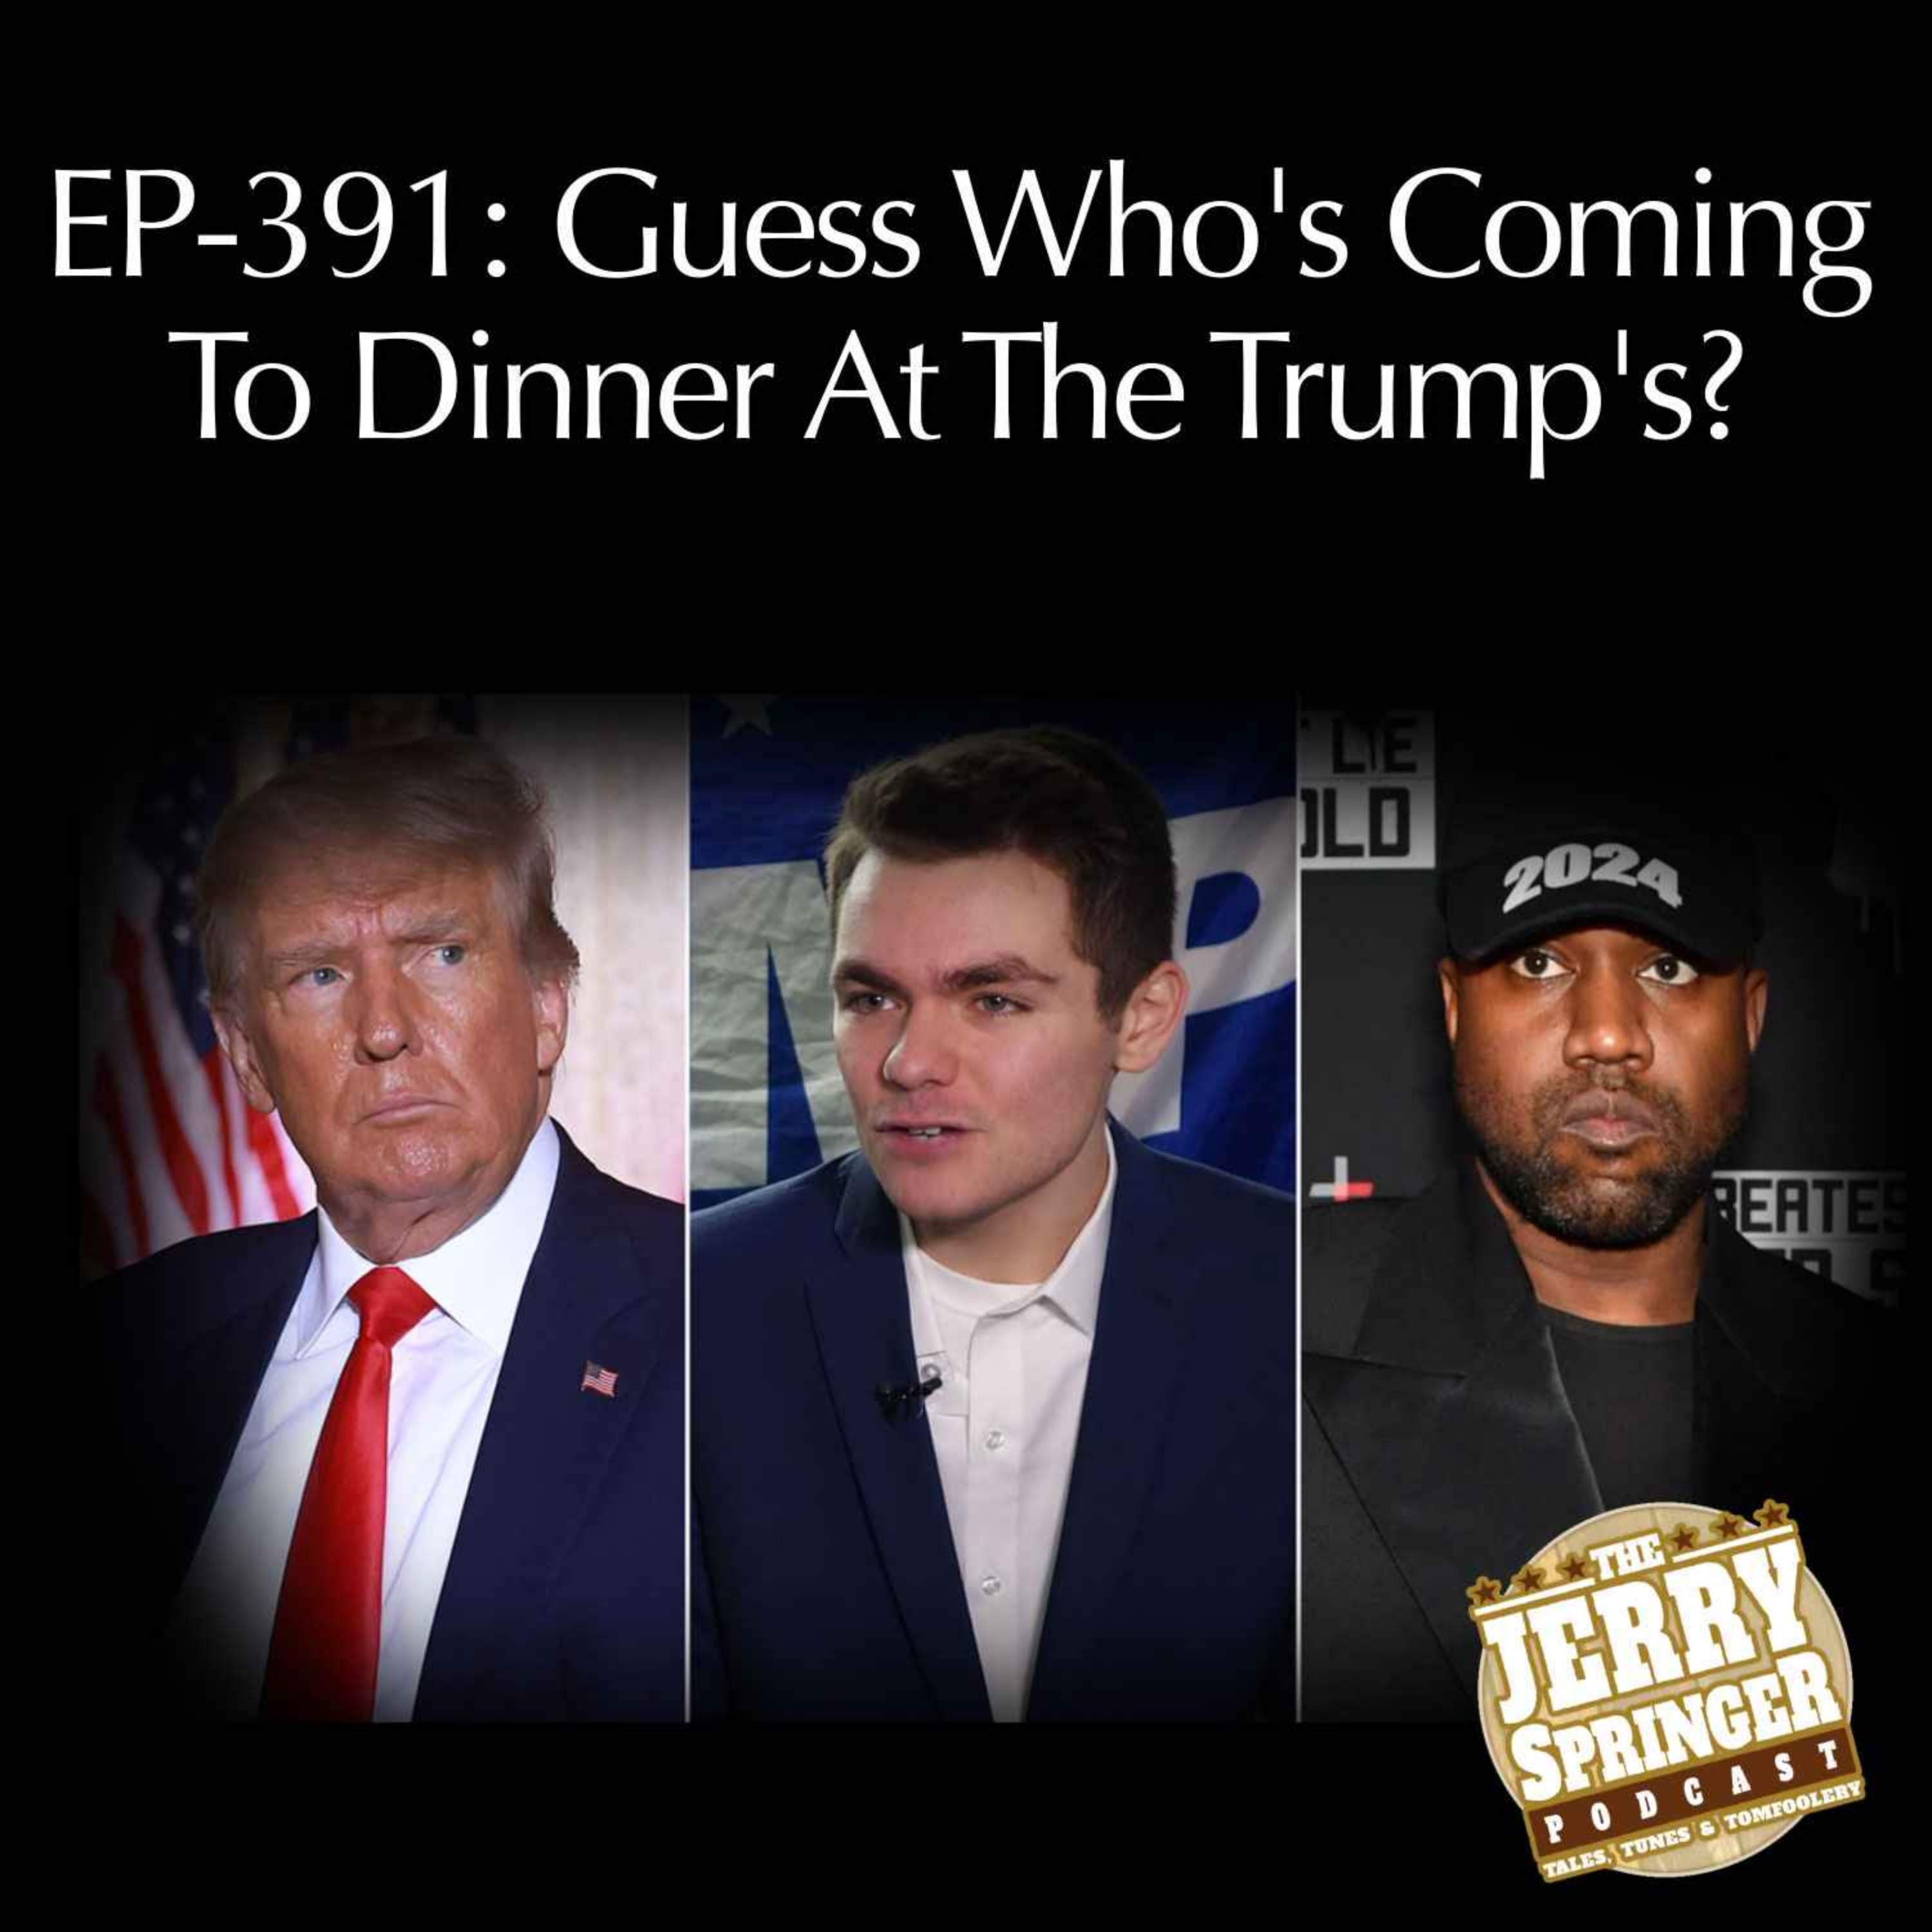 Guess Who’s Coming To Dinner At The Trump’s? EP - 391